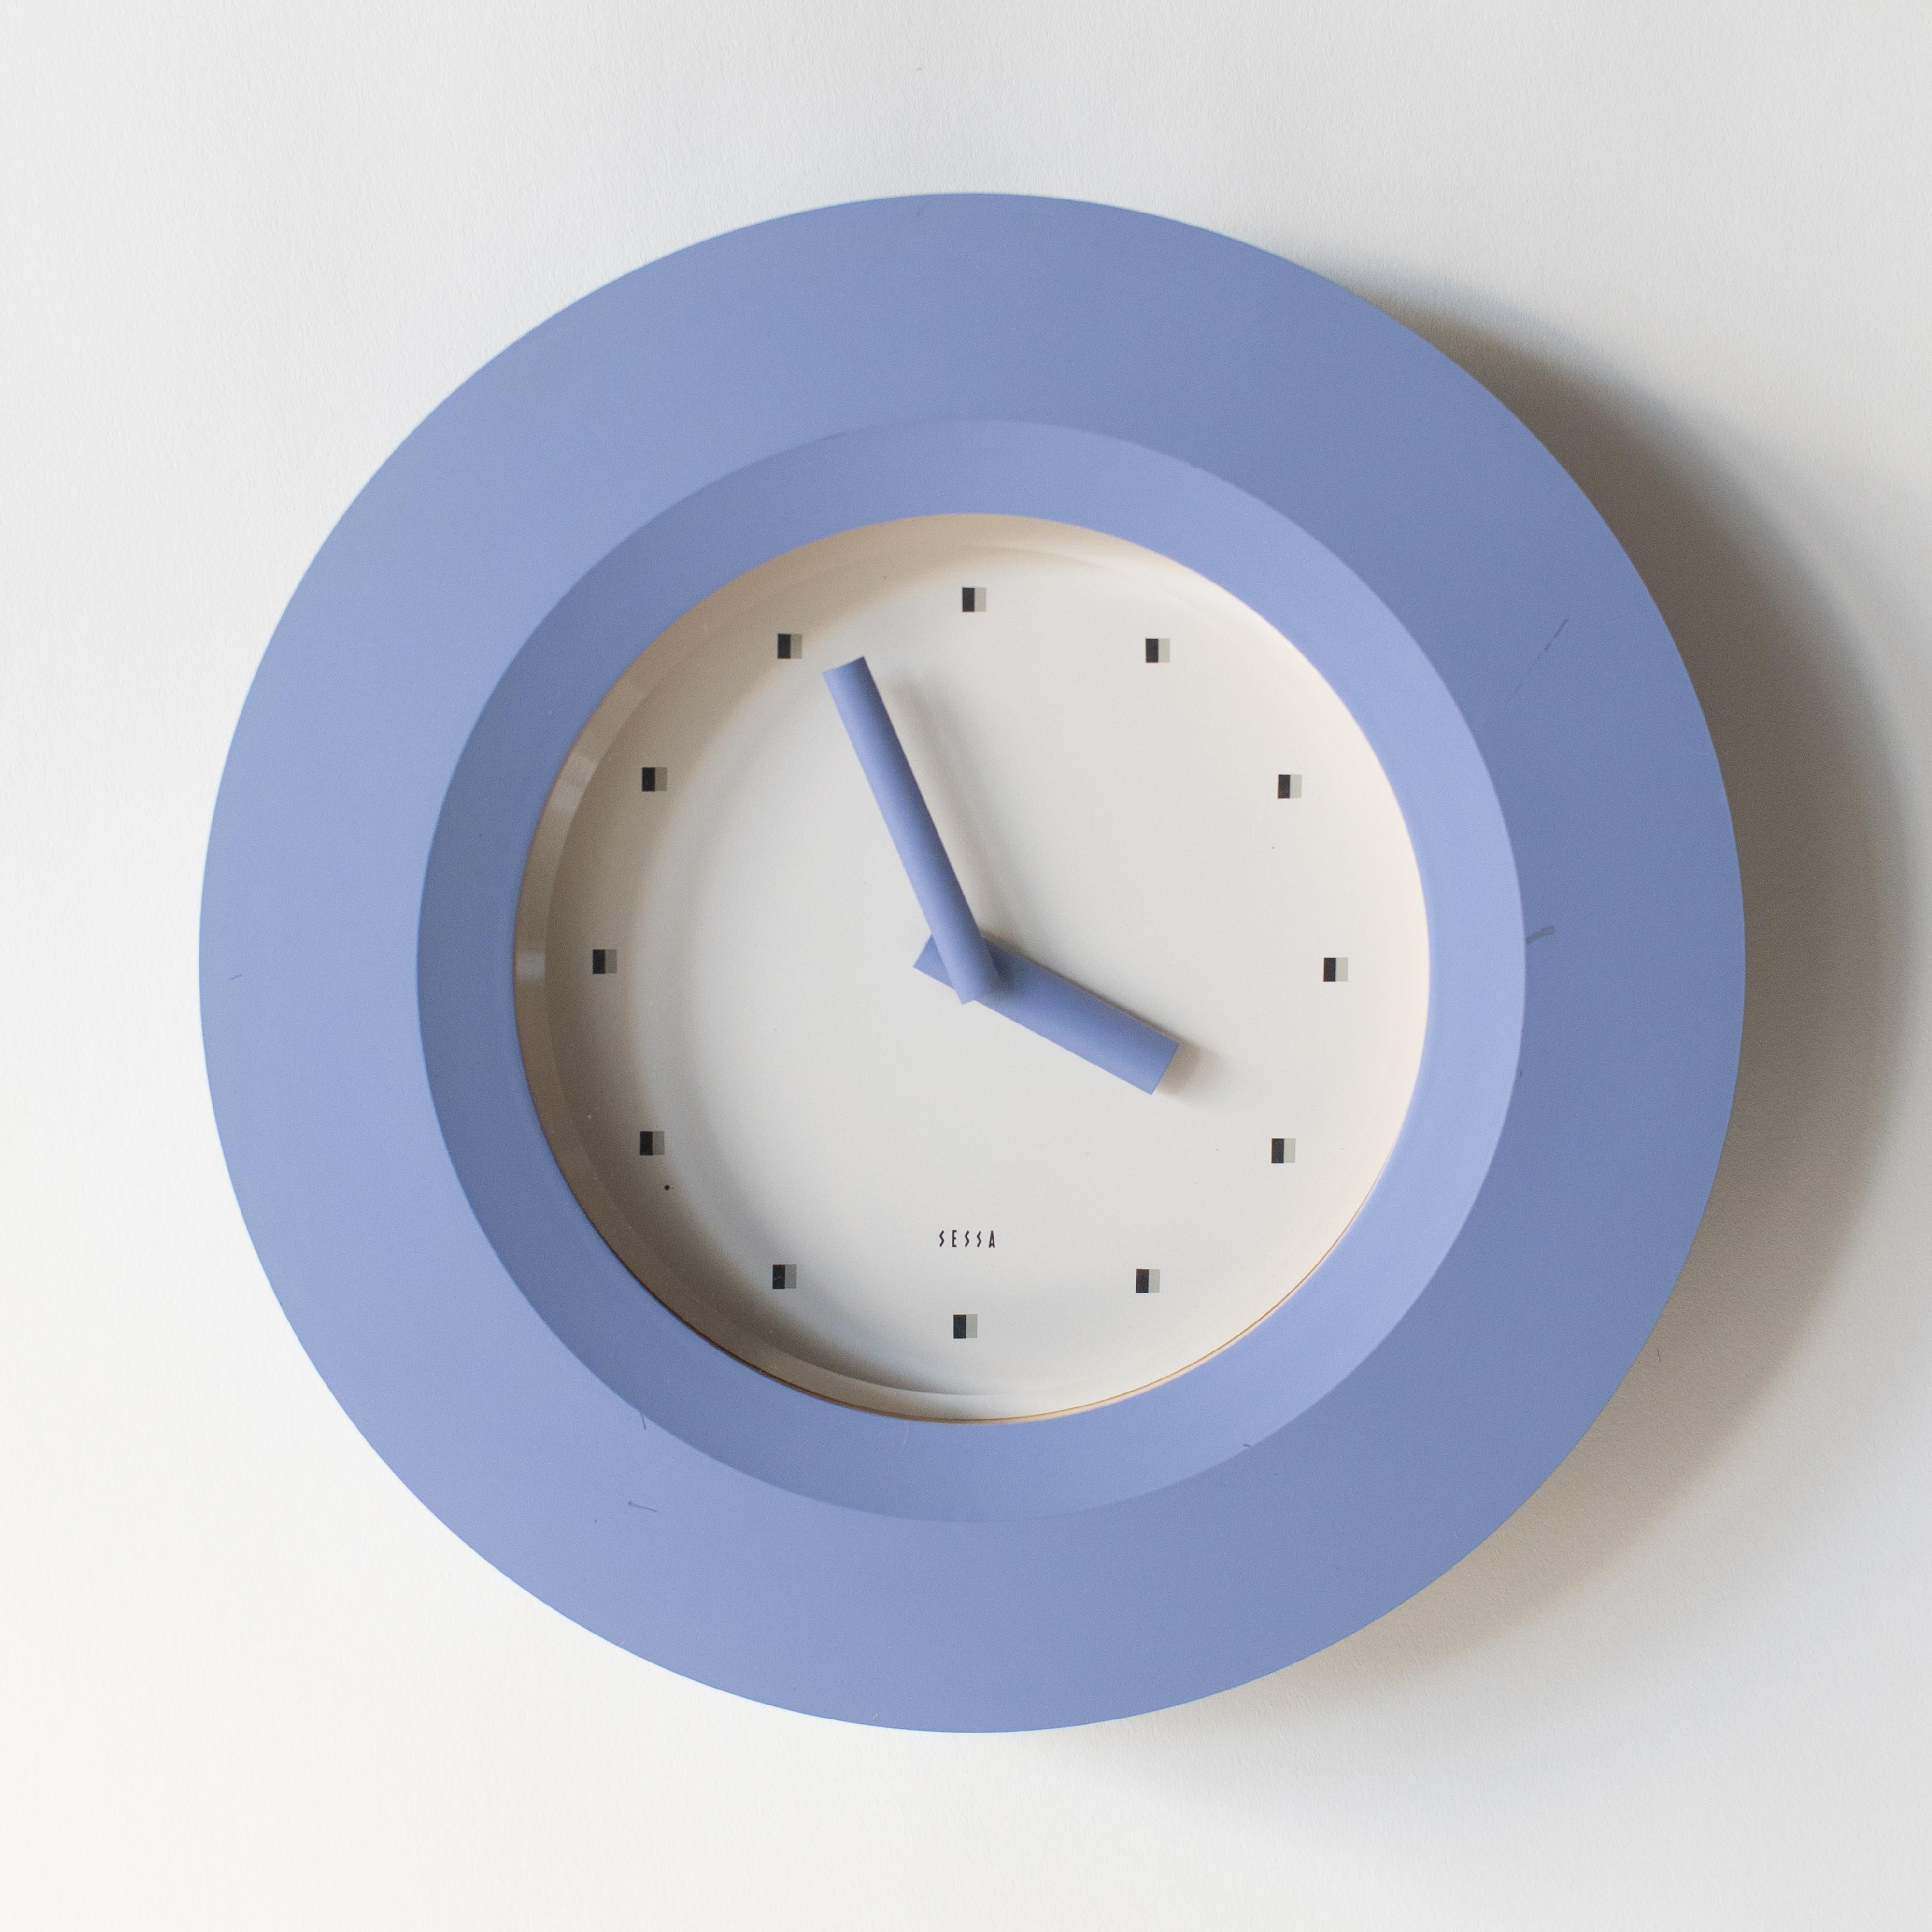 Wall clock by Sessa. Takashi Kato designed a lot of clocks in the 1980s-1990s. Some of clock collections were released from Neos Lorenz in European Market. Which sold together with Natherie du Pastier and George Sowden works.
Another green color is